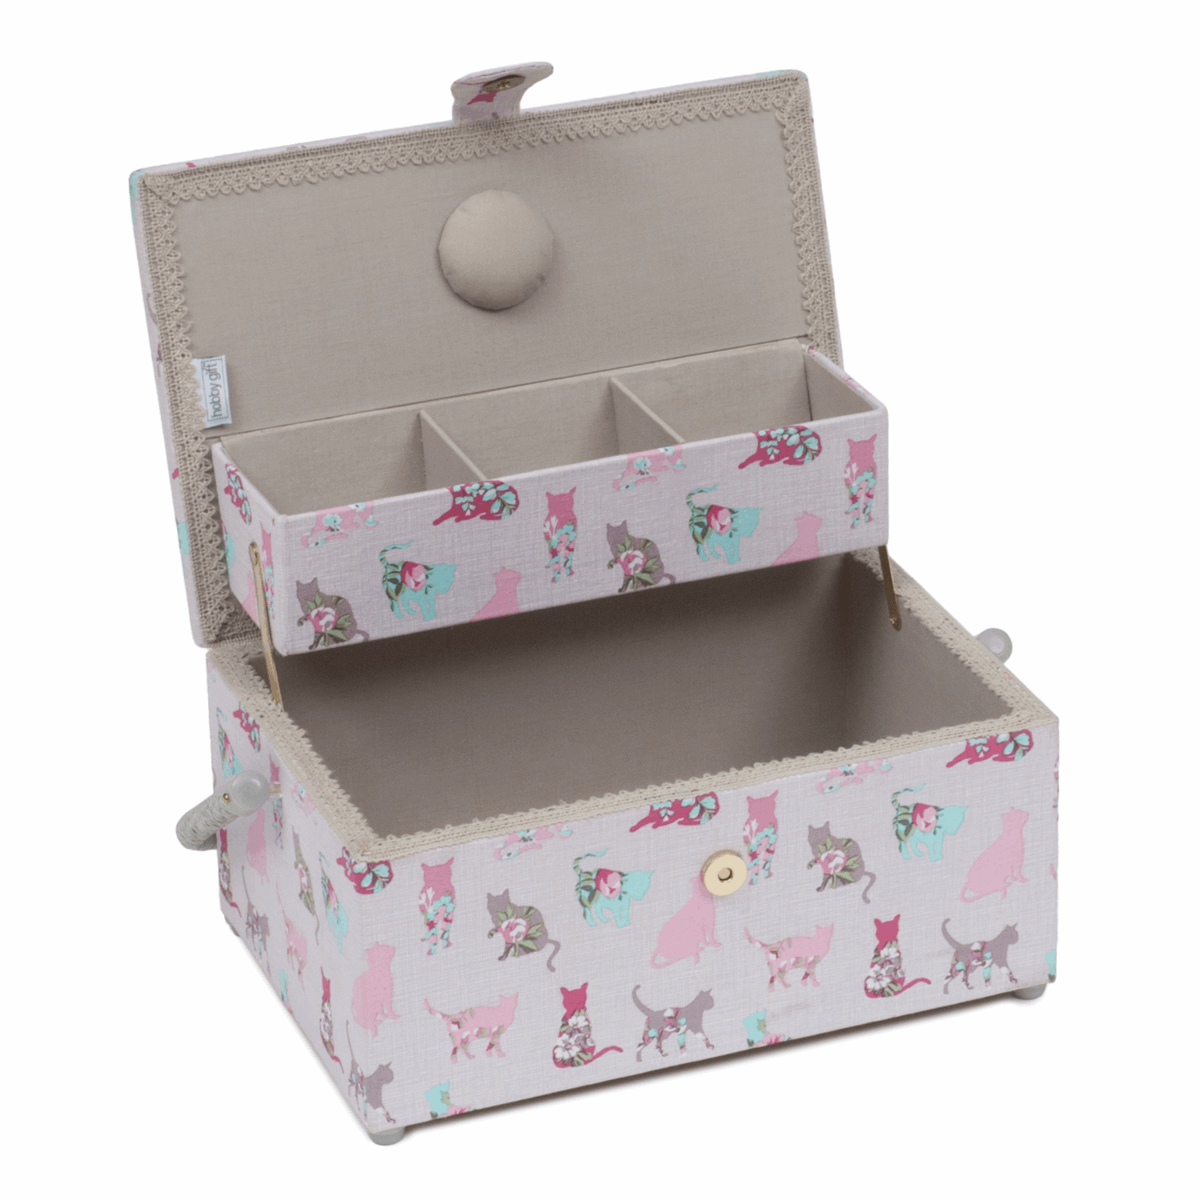 Cats Cantilever Sewing Box - Large